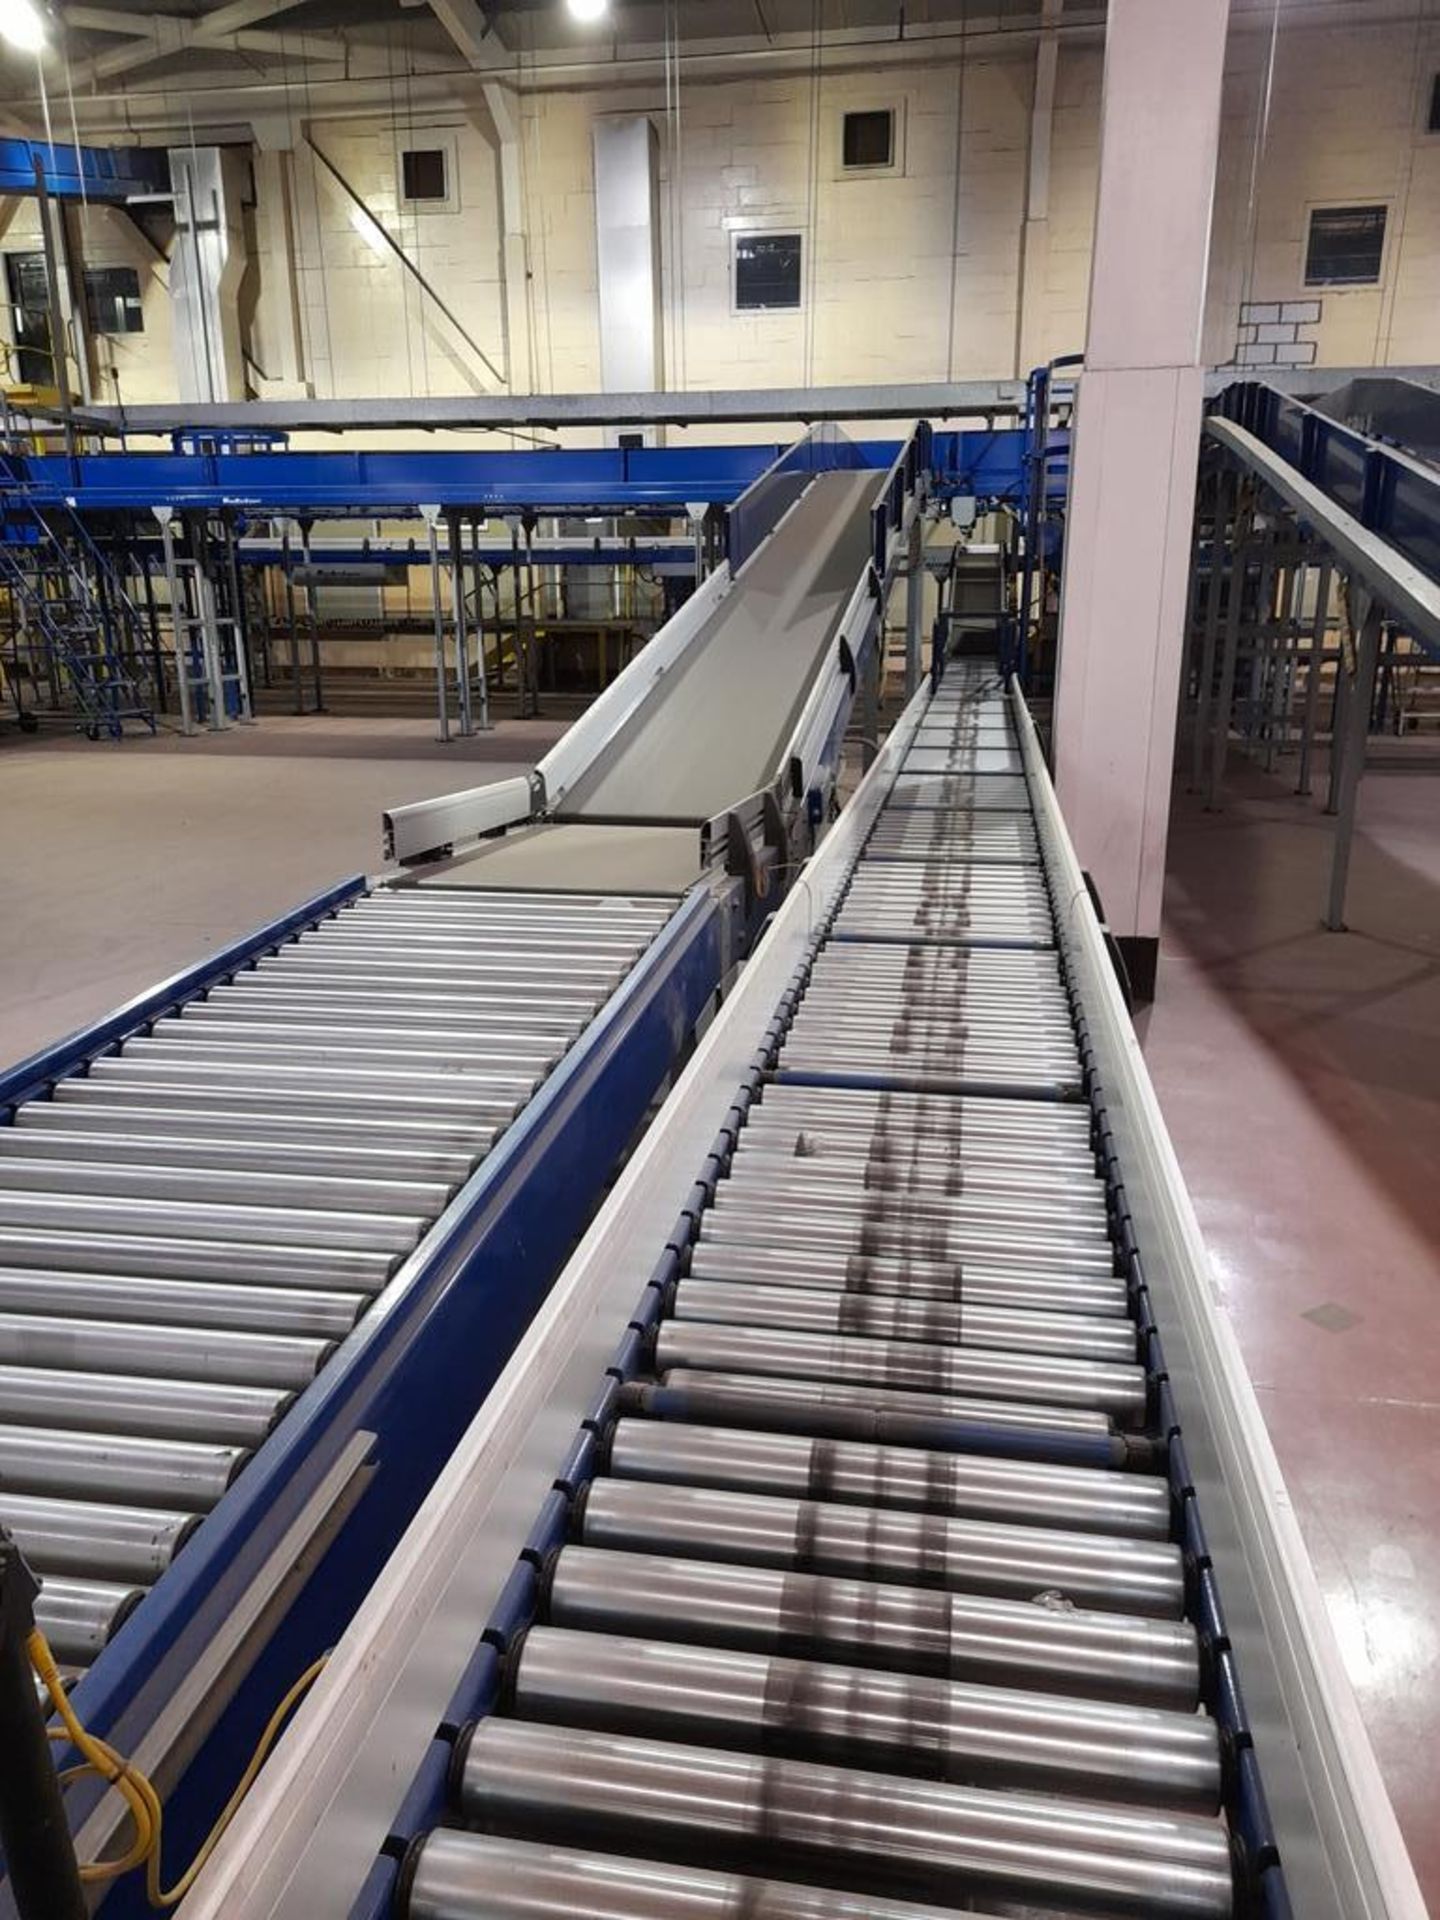 Unloading and data catchment: Line 3 - Approx. 12 various conveyors, belt & roller, straight, - Image 12 of 16